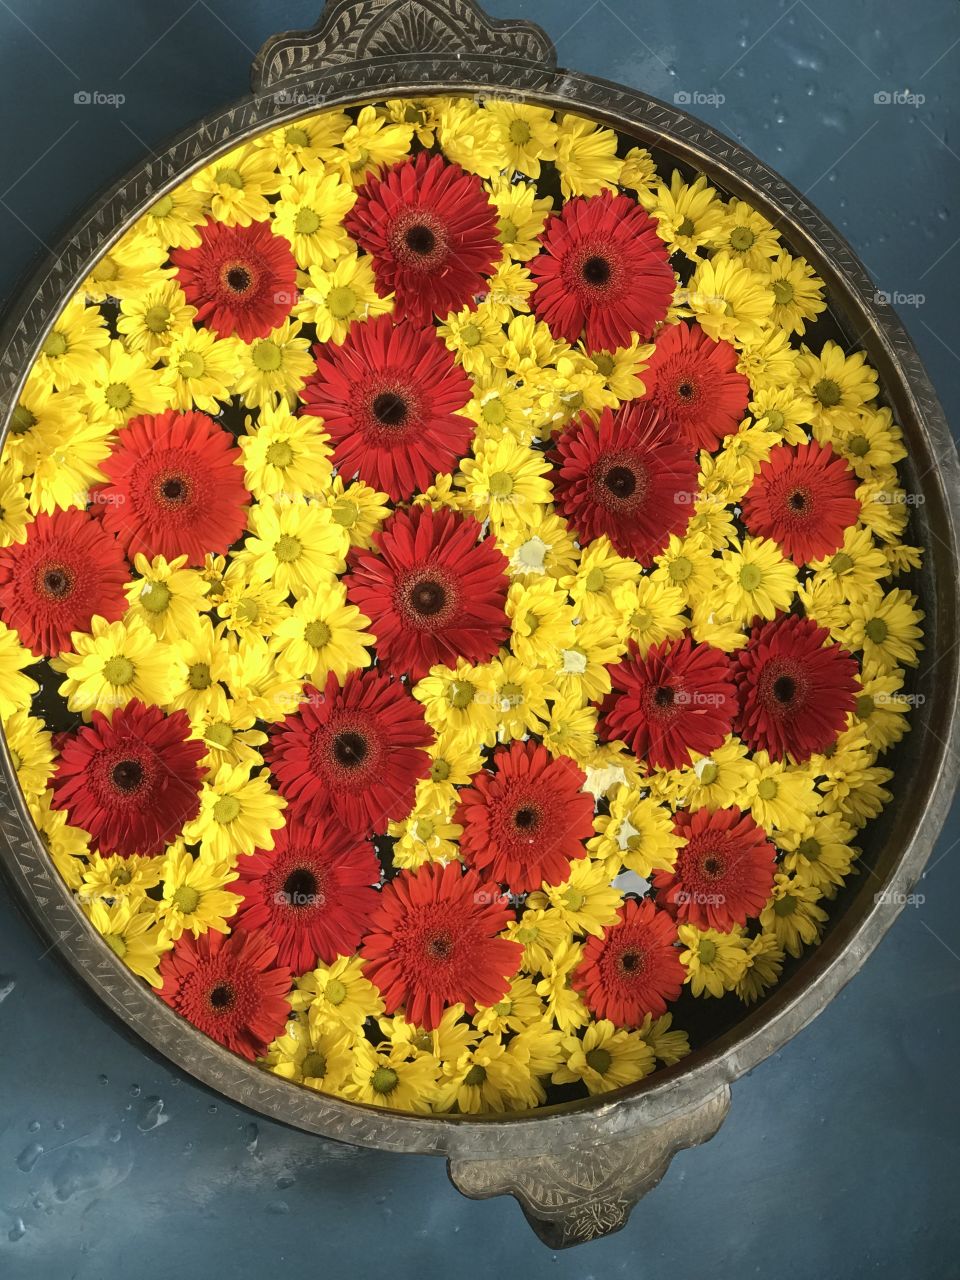 Red and yellow contrasting flowers in large bowl